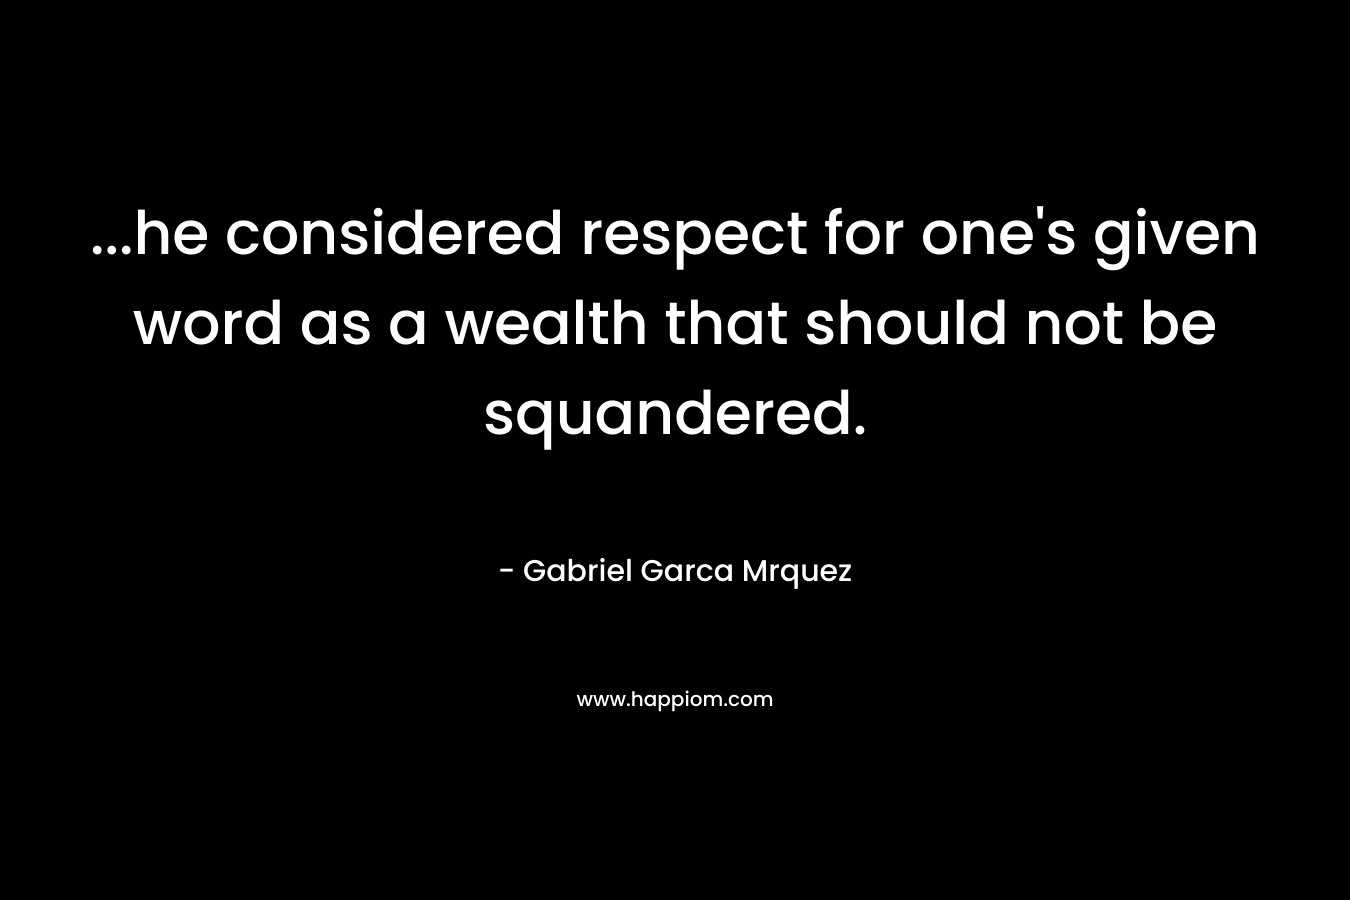 …he considered respect for one’s given word as a wealth that should not be squandered. – Gabriel Garca Mrquez